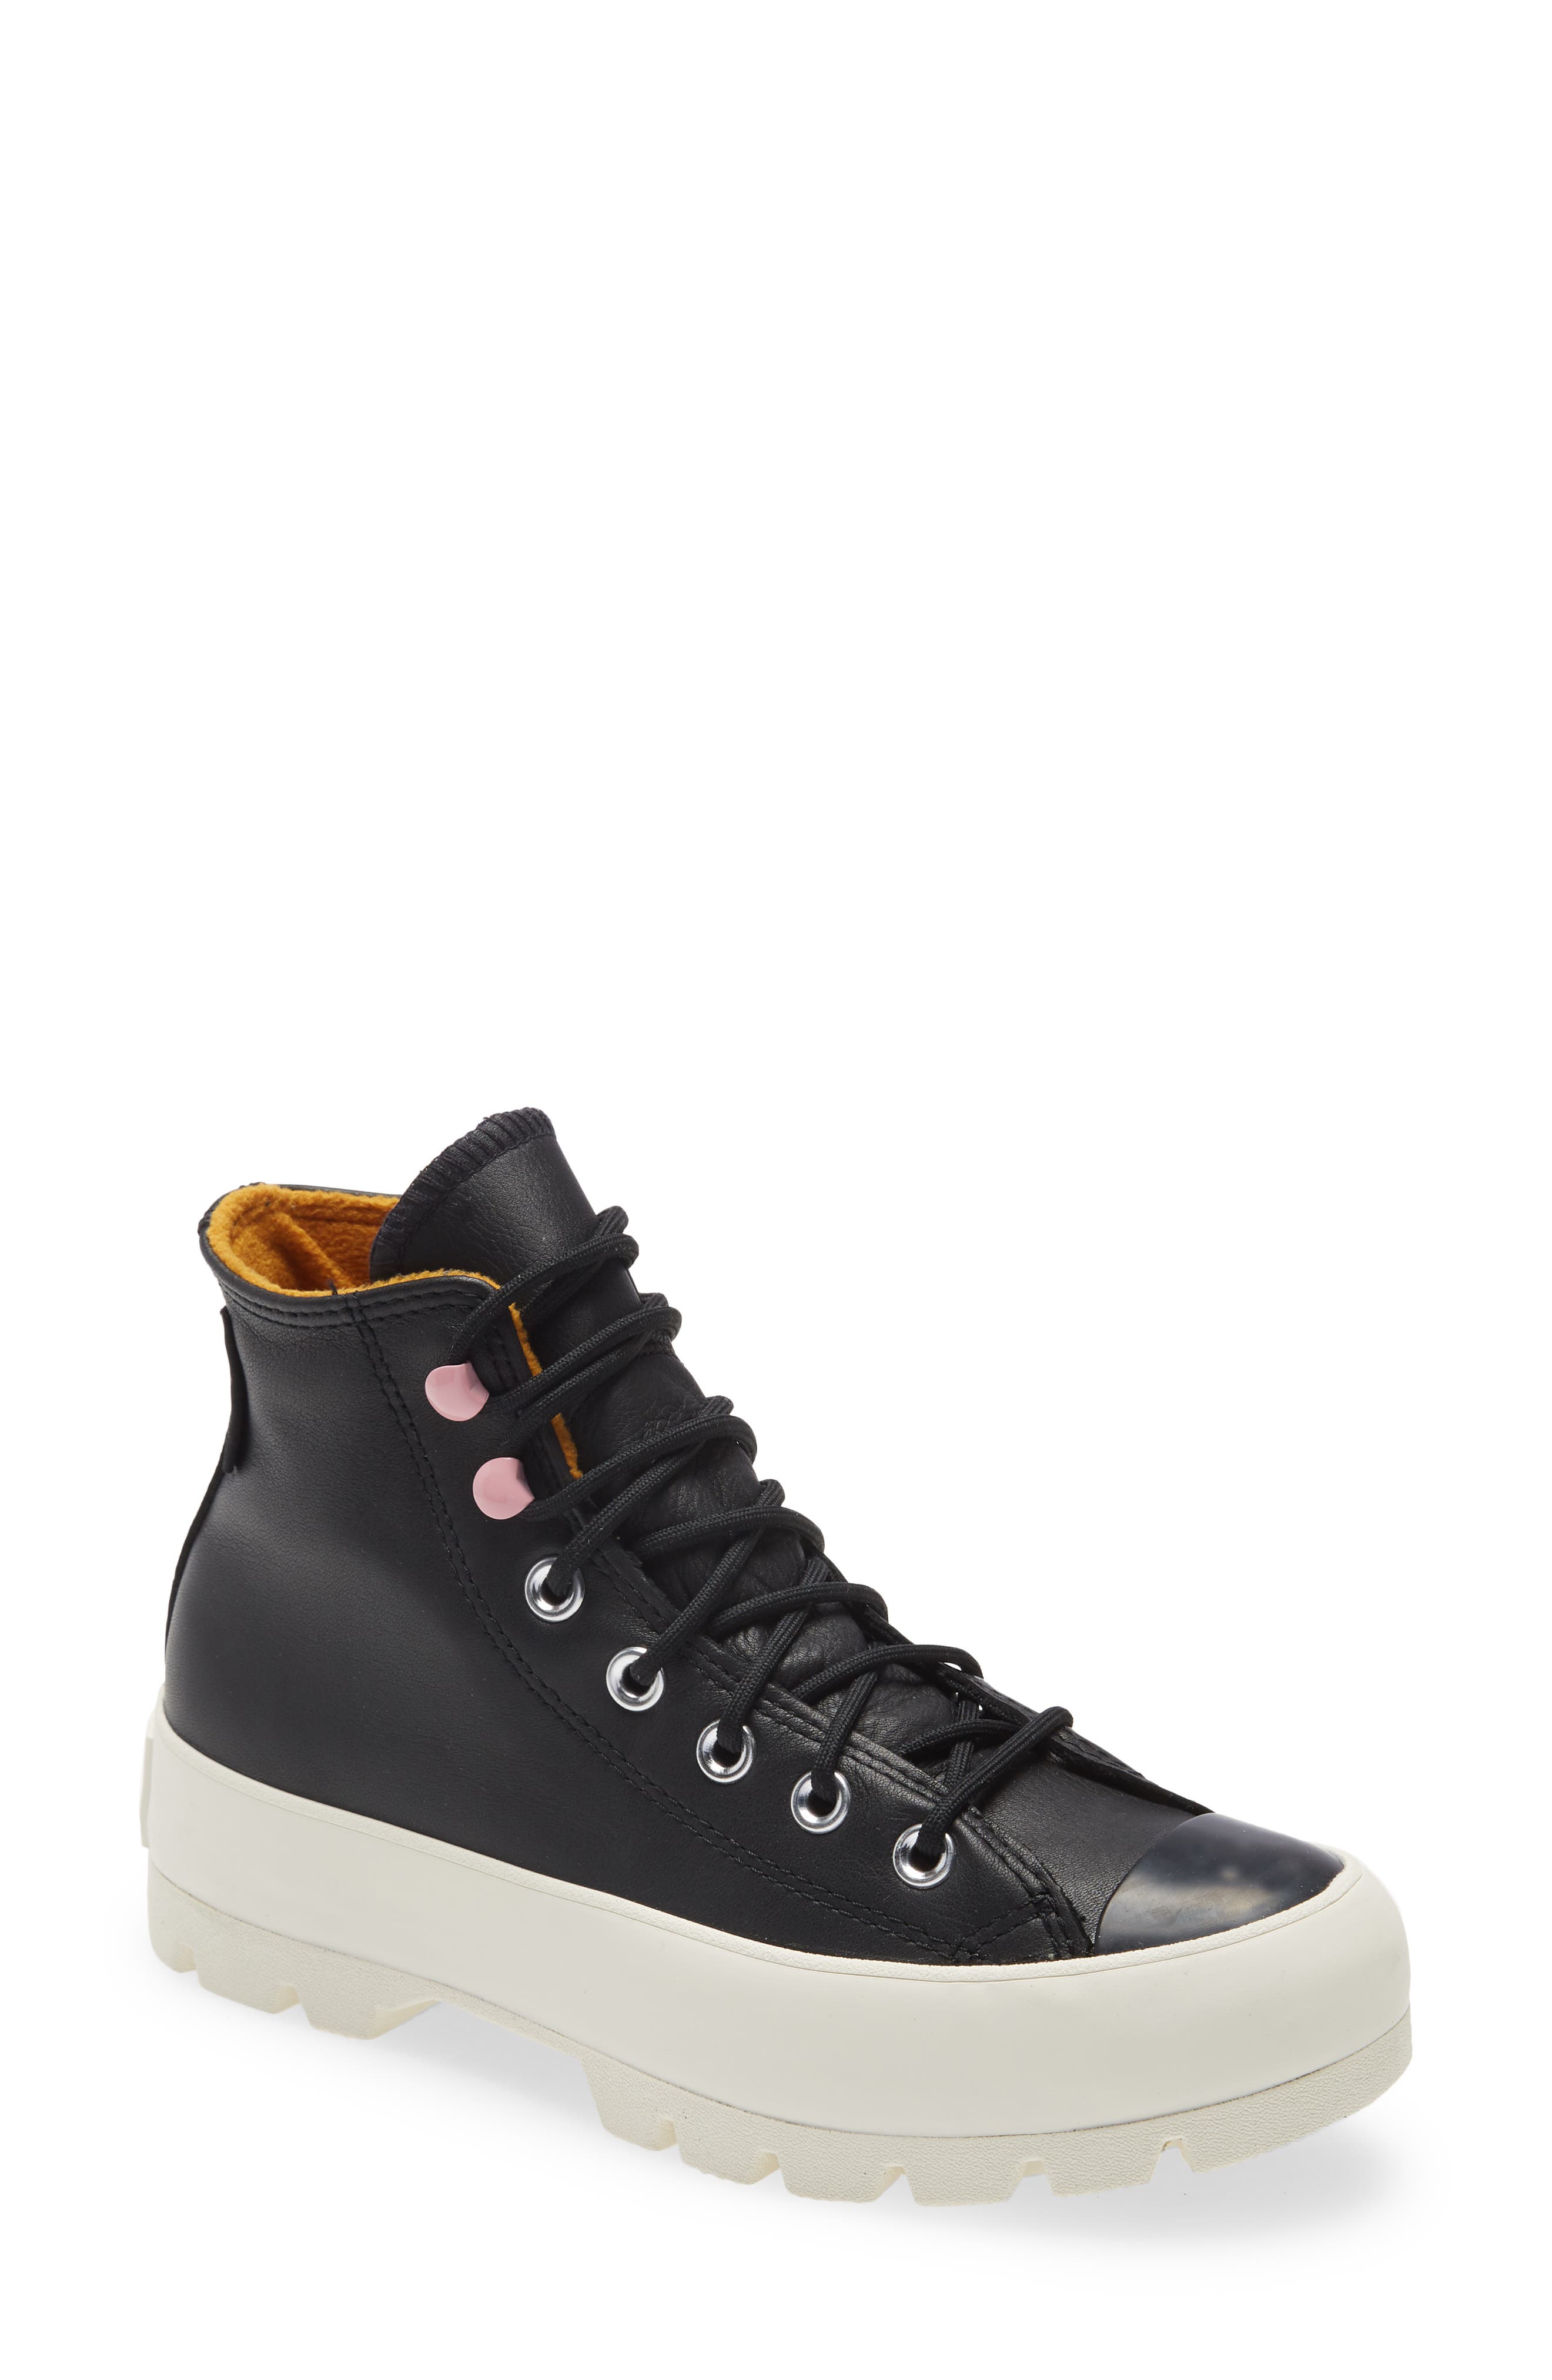 CONVERSE CHUCK TAYLOR® ALL STAR® GORE-TEX® WATERPROOF LUGGED HIGH TOP SNEAKER,194432358218